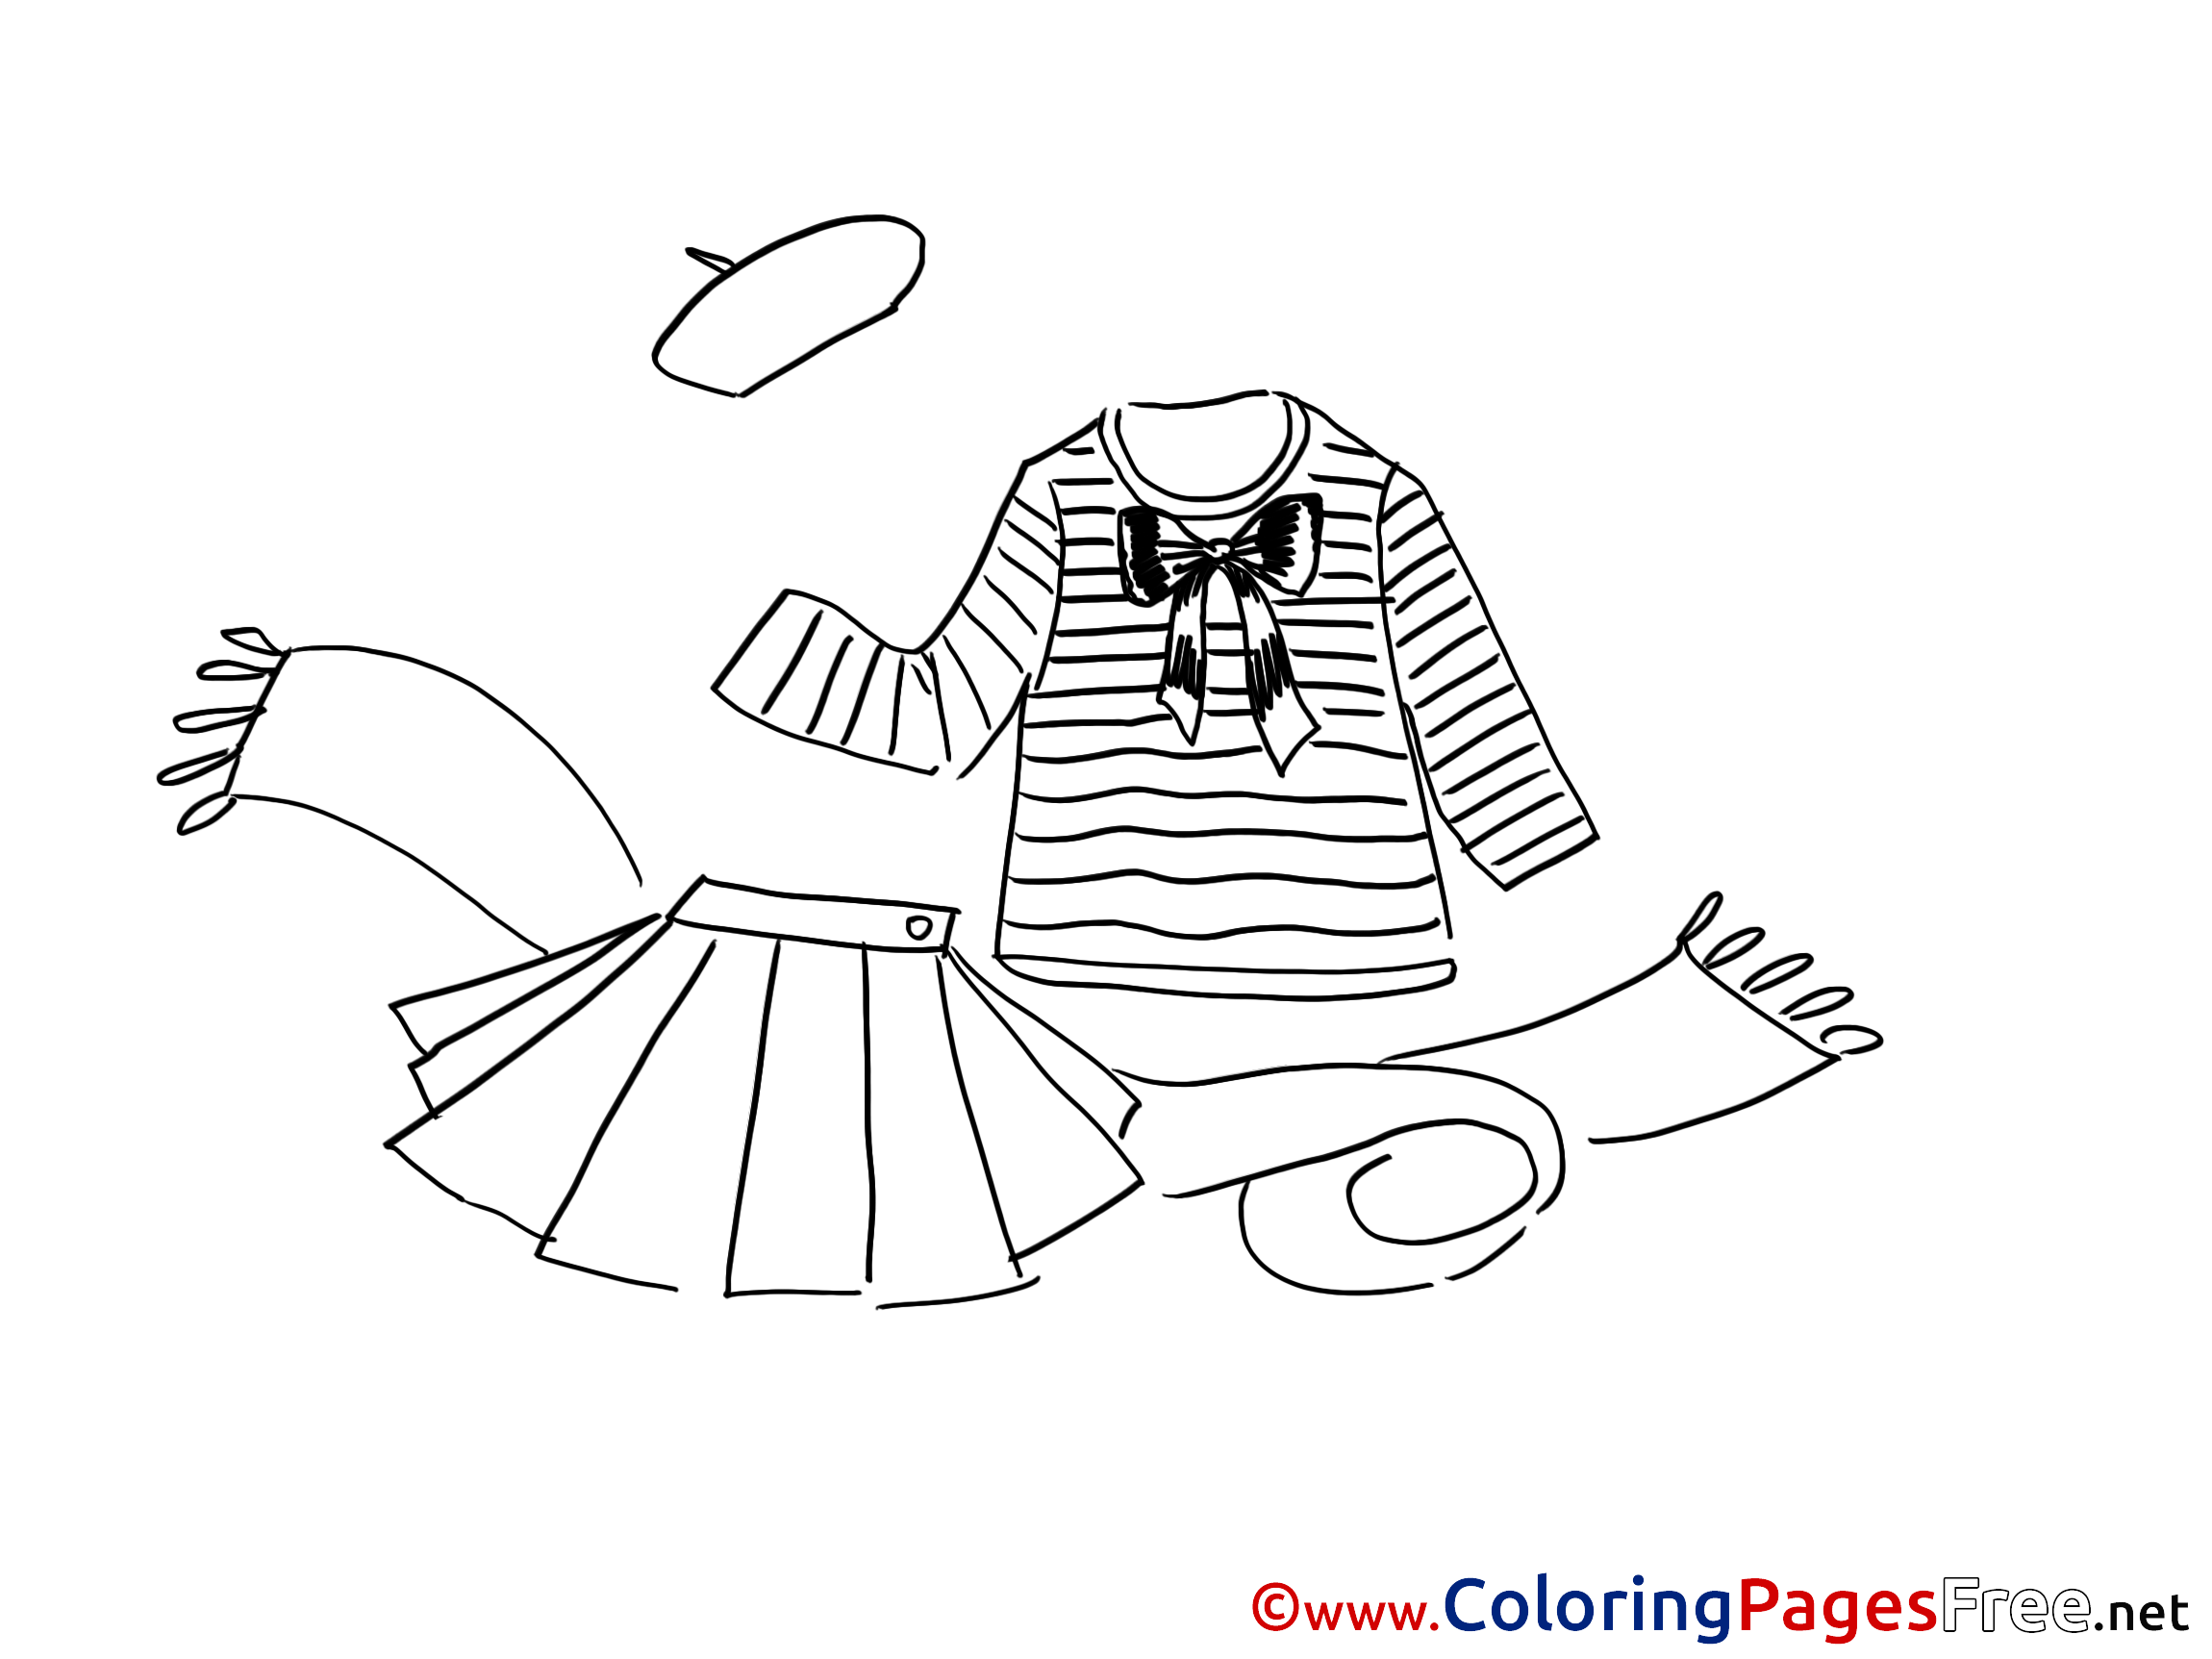 Scarf Skirt Colouring Page printable free